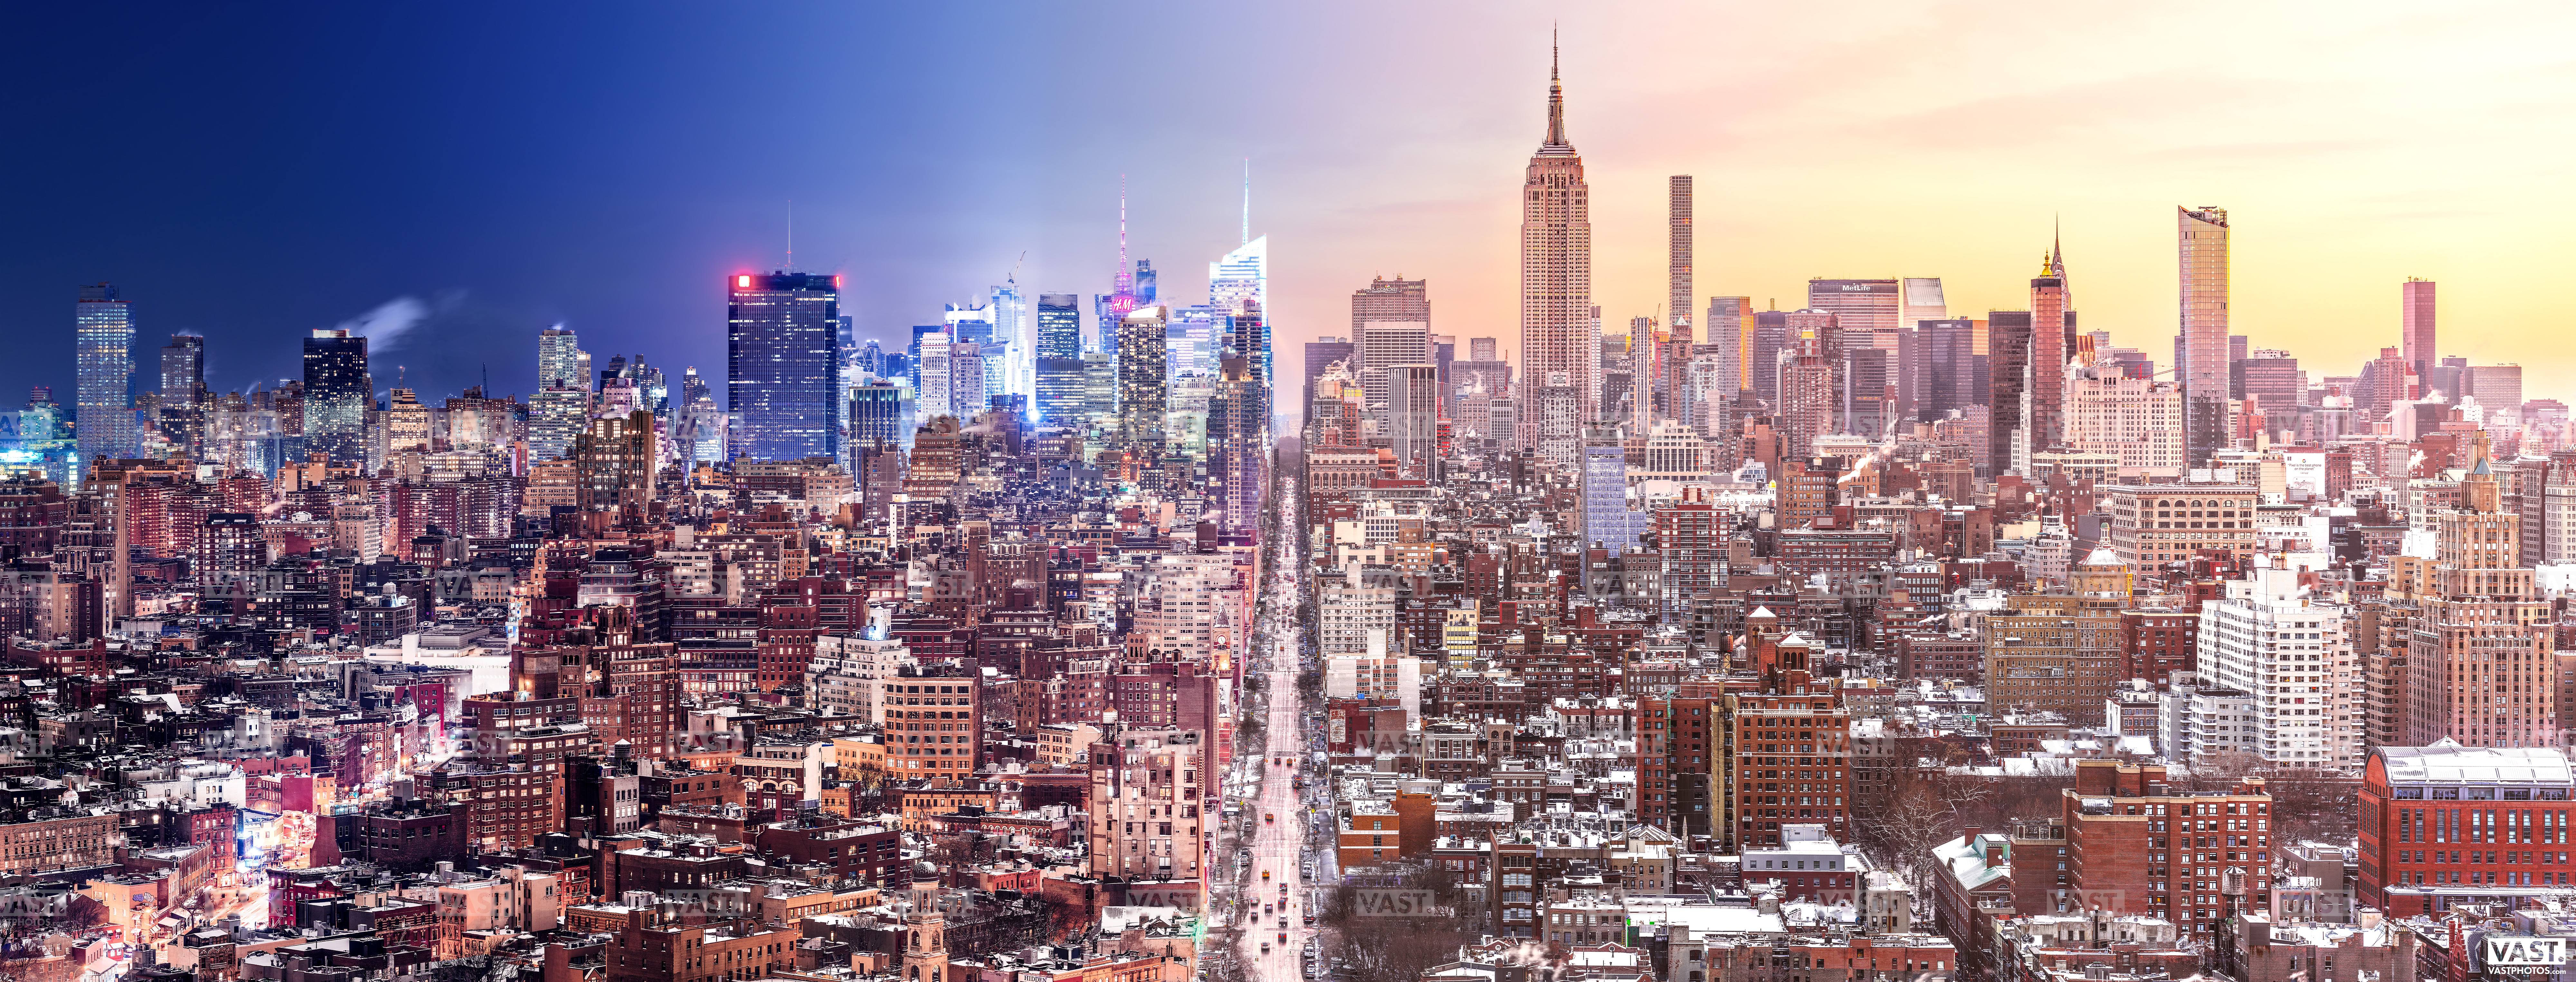 cityscape, New York City, Watermarked Wallpaper